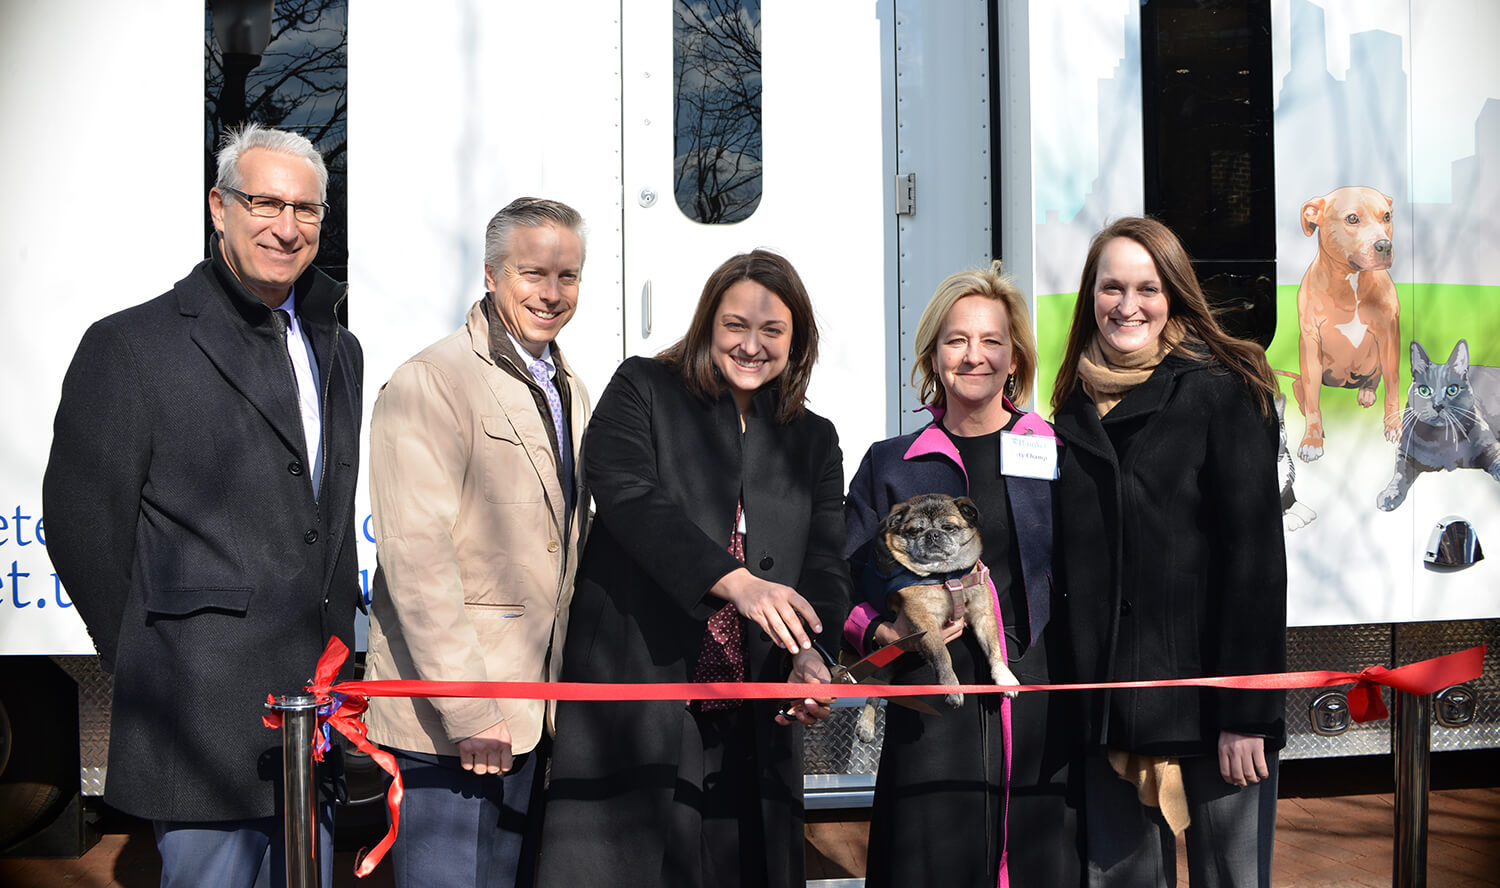 Penn Vet Dean Andrew Hoffman; Dr. David Haworth, PetSmart Charities; Dr. Brittany Watson; Ms. Katy Champ, Bernice Barbour Foundation; and Dr. Chelsea Reinhard cut the ribbon at the mobile clinic unveiling.